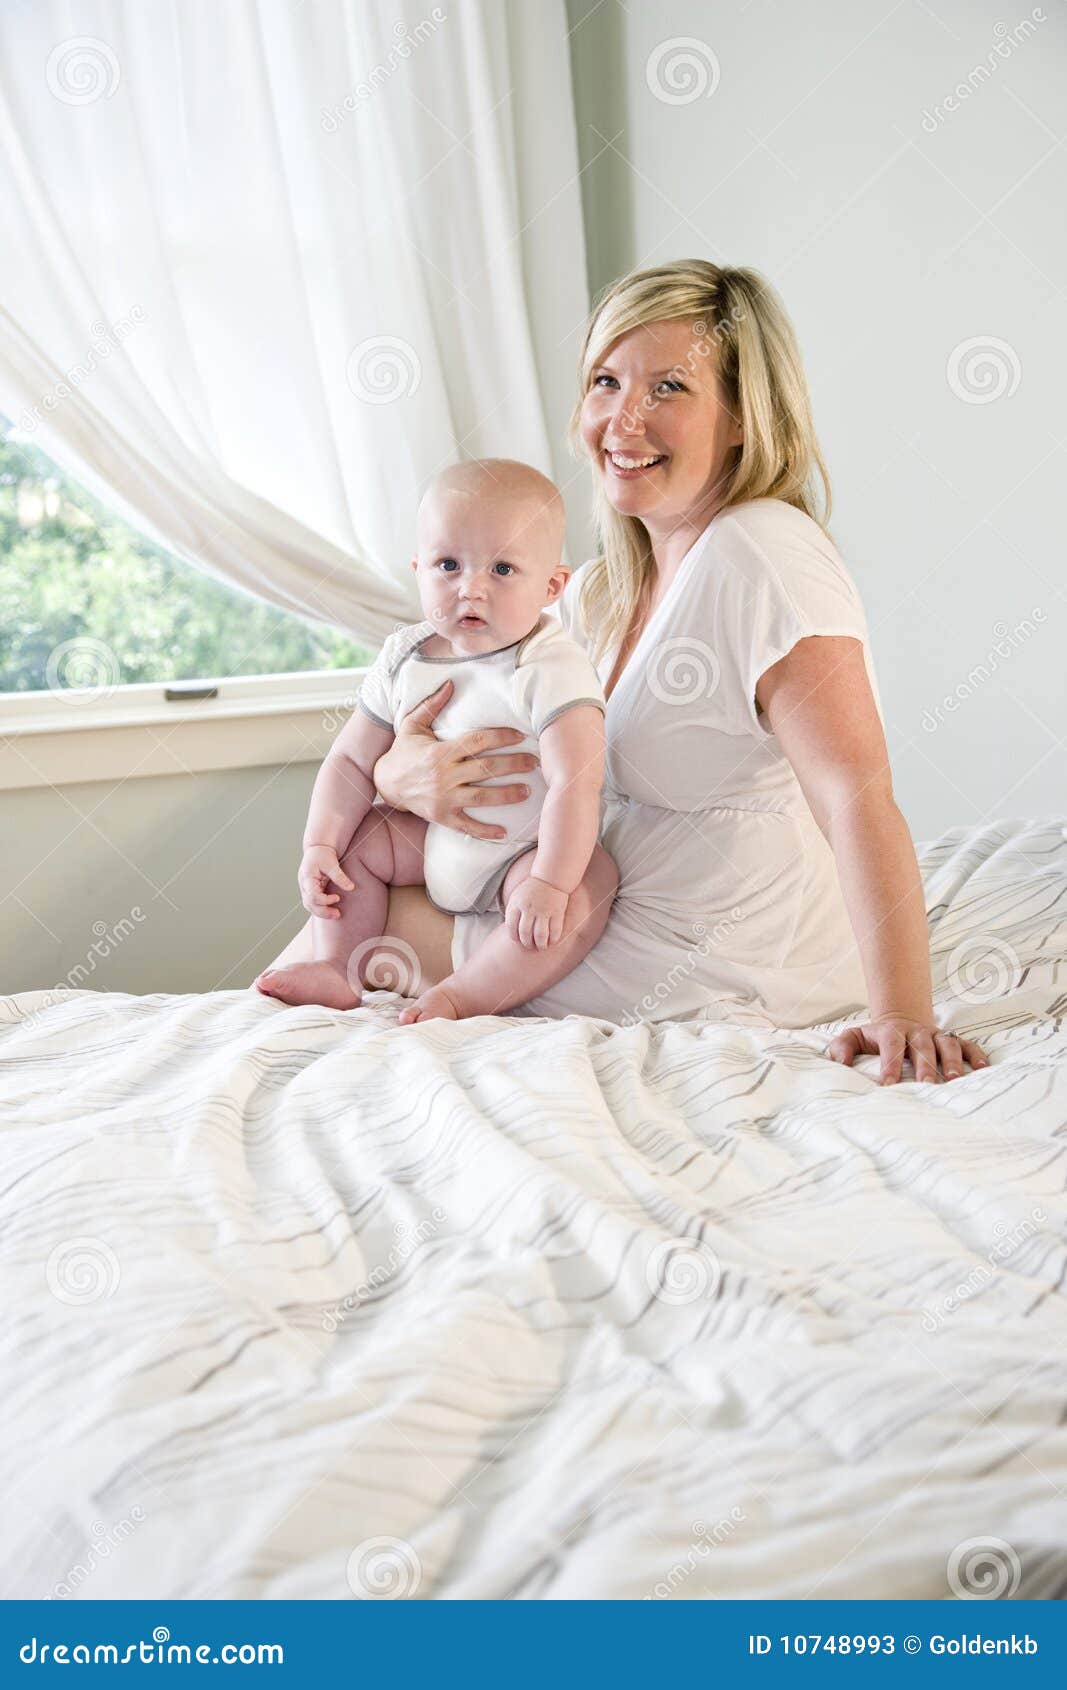 Happy Mother Holding Cute Baby Stock Image - Image of affectionate ...